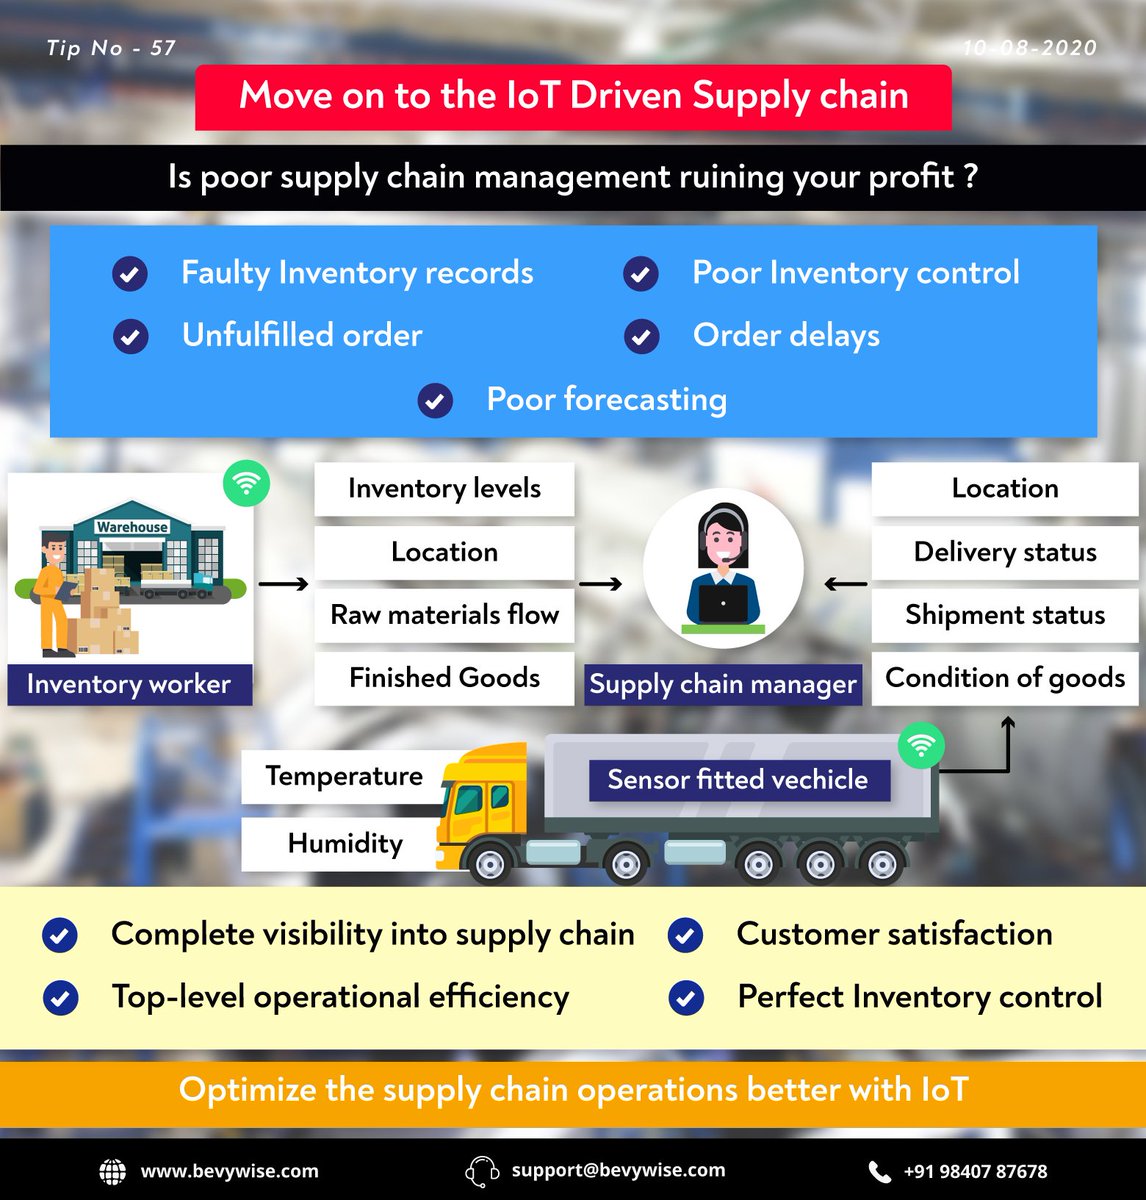 #tip of the week - 57

Is poor #SupplyChain management ruining your profit? 

Exploit #IoT- driven supply chain to address supply chain issues & to enhance supply chain operations faster & easier.

#iiot #automation #manufacturing #Industry40 #inventorytracking #mondaythoughts